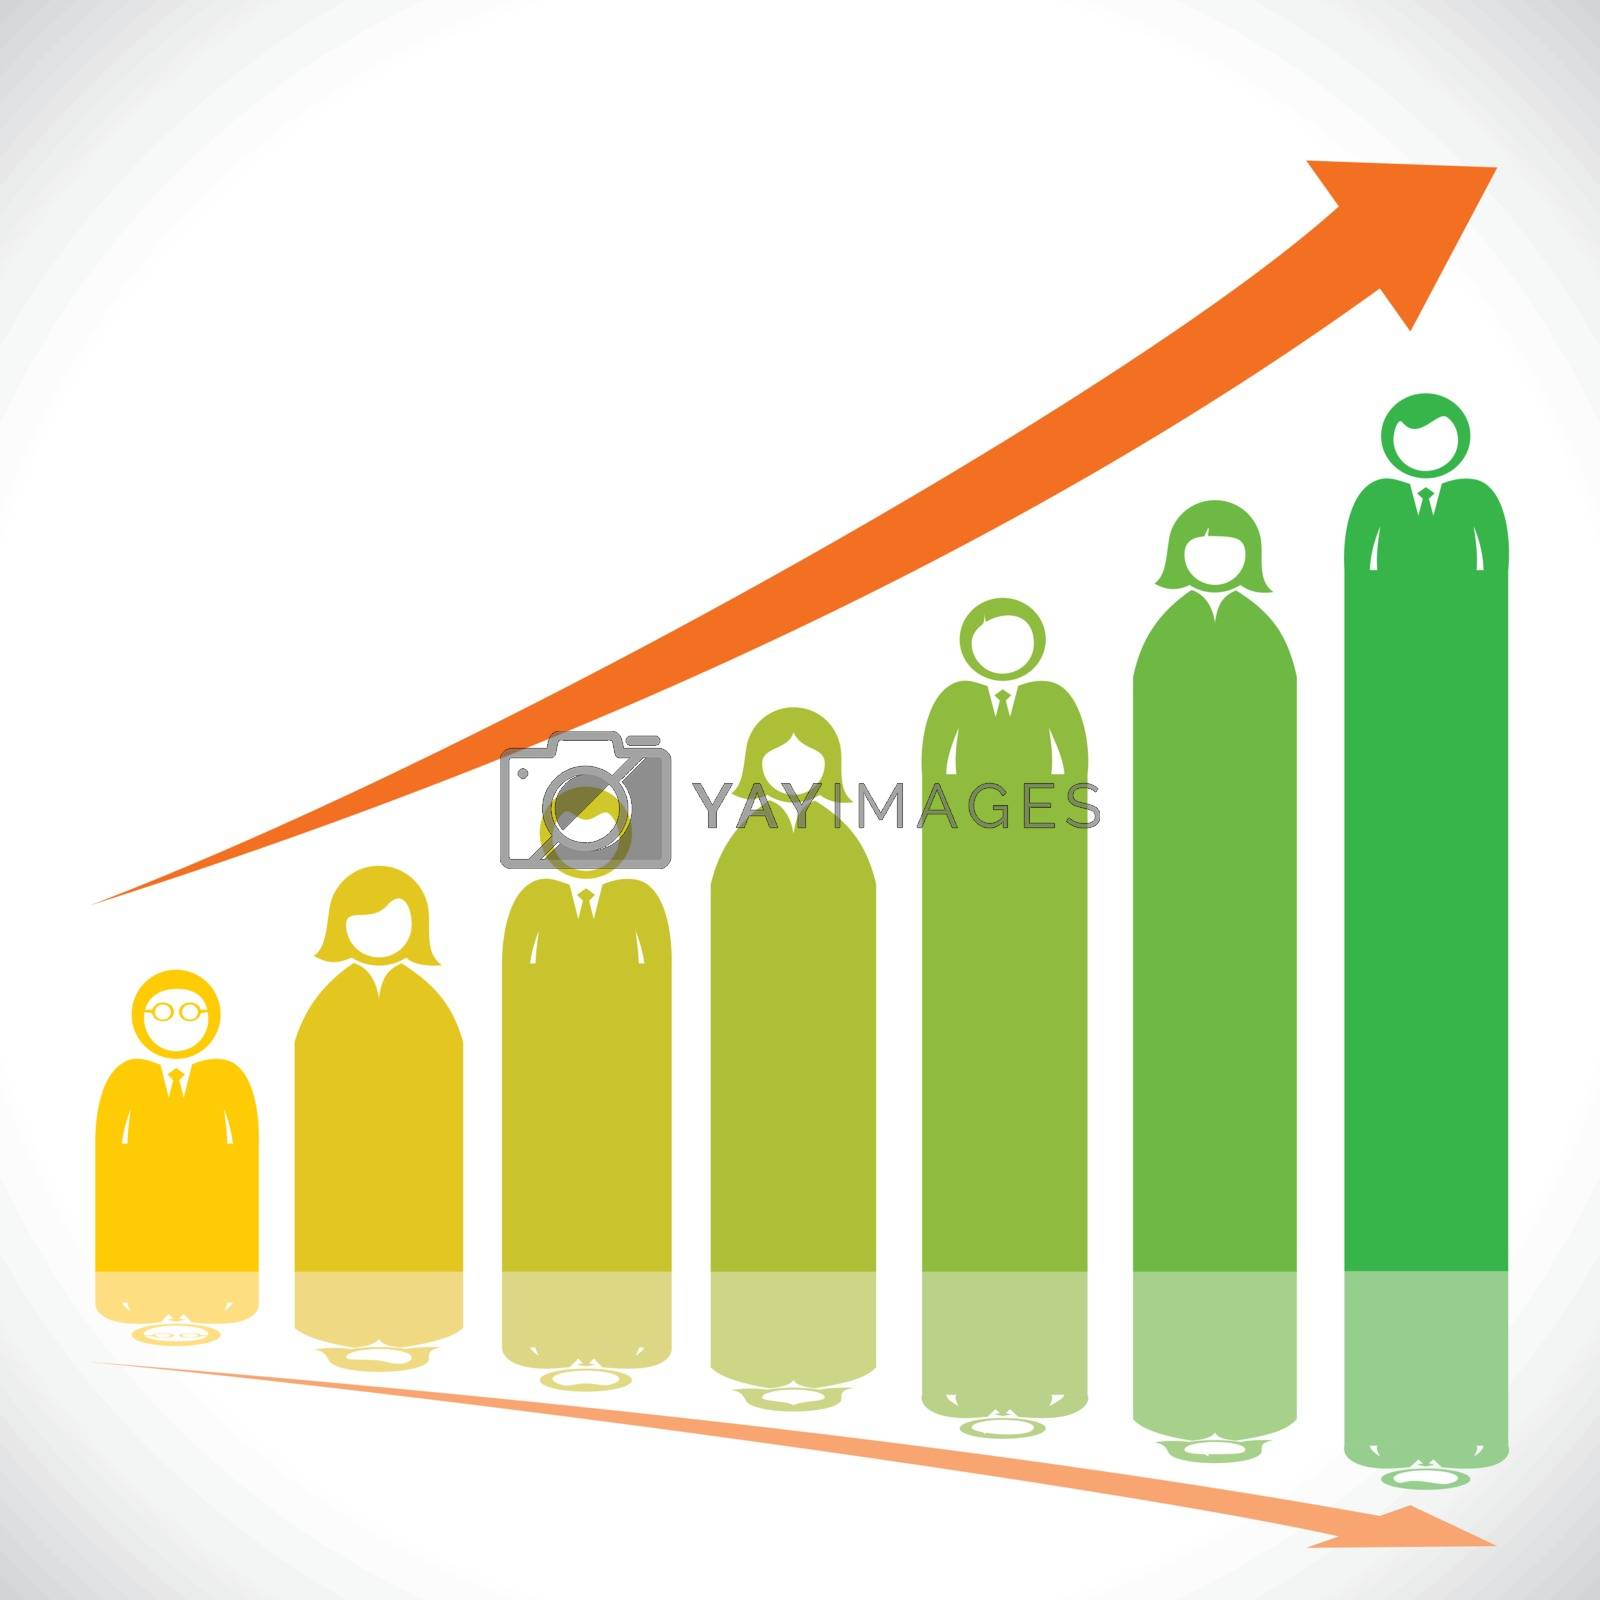 Royalty free image of business people market graph by designaart